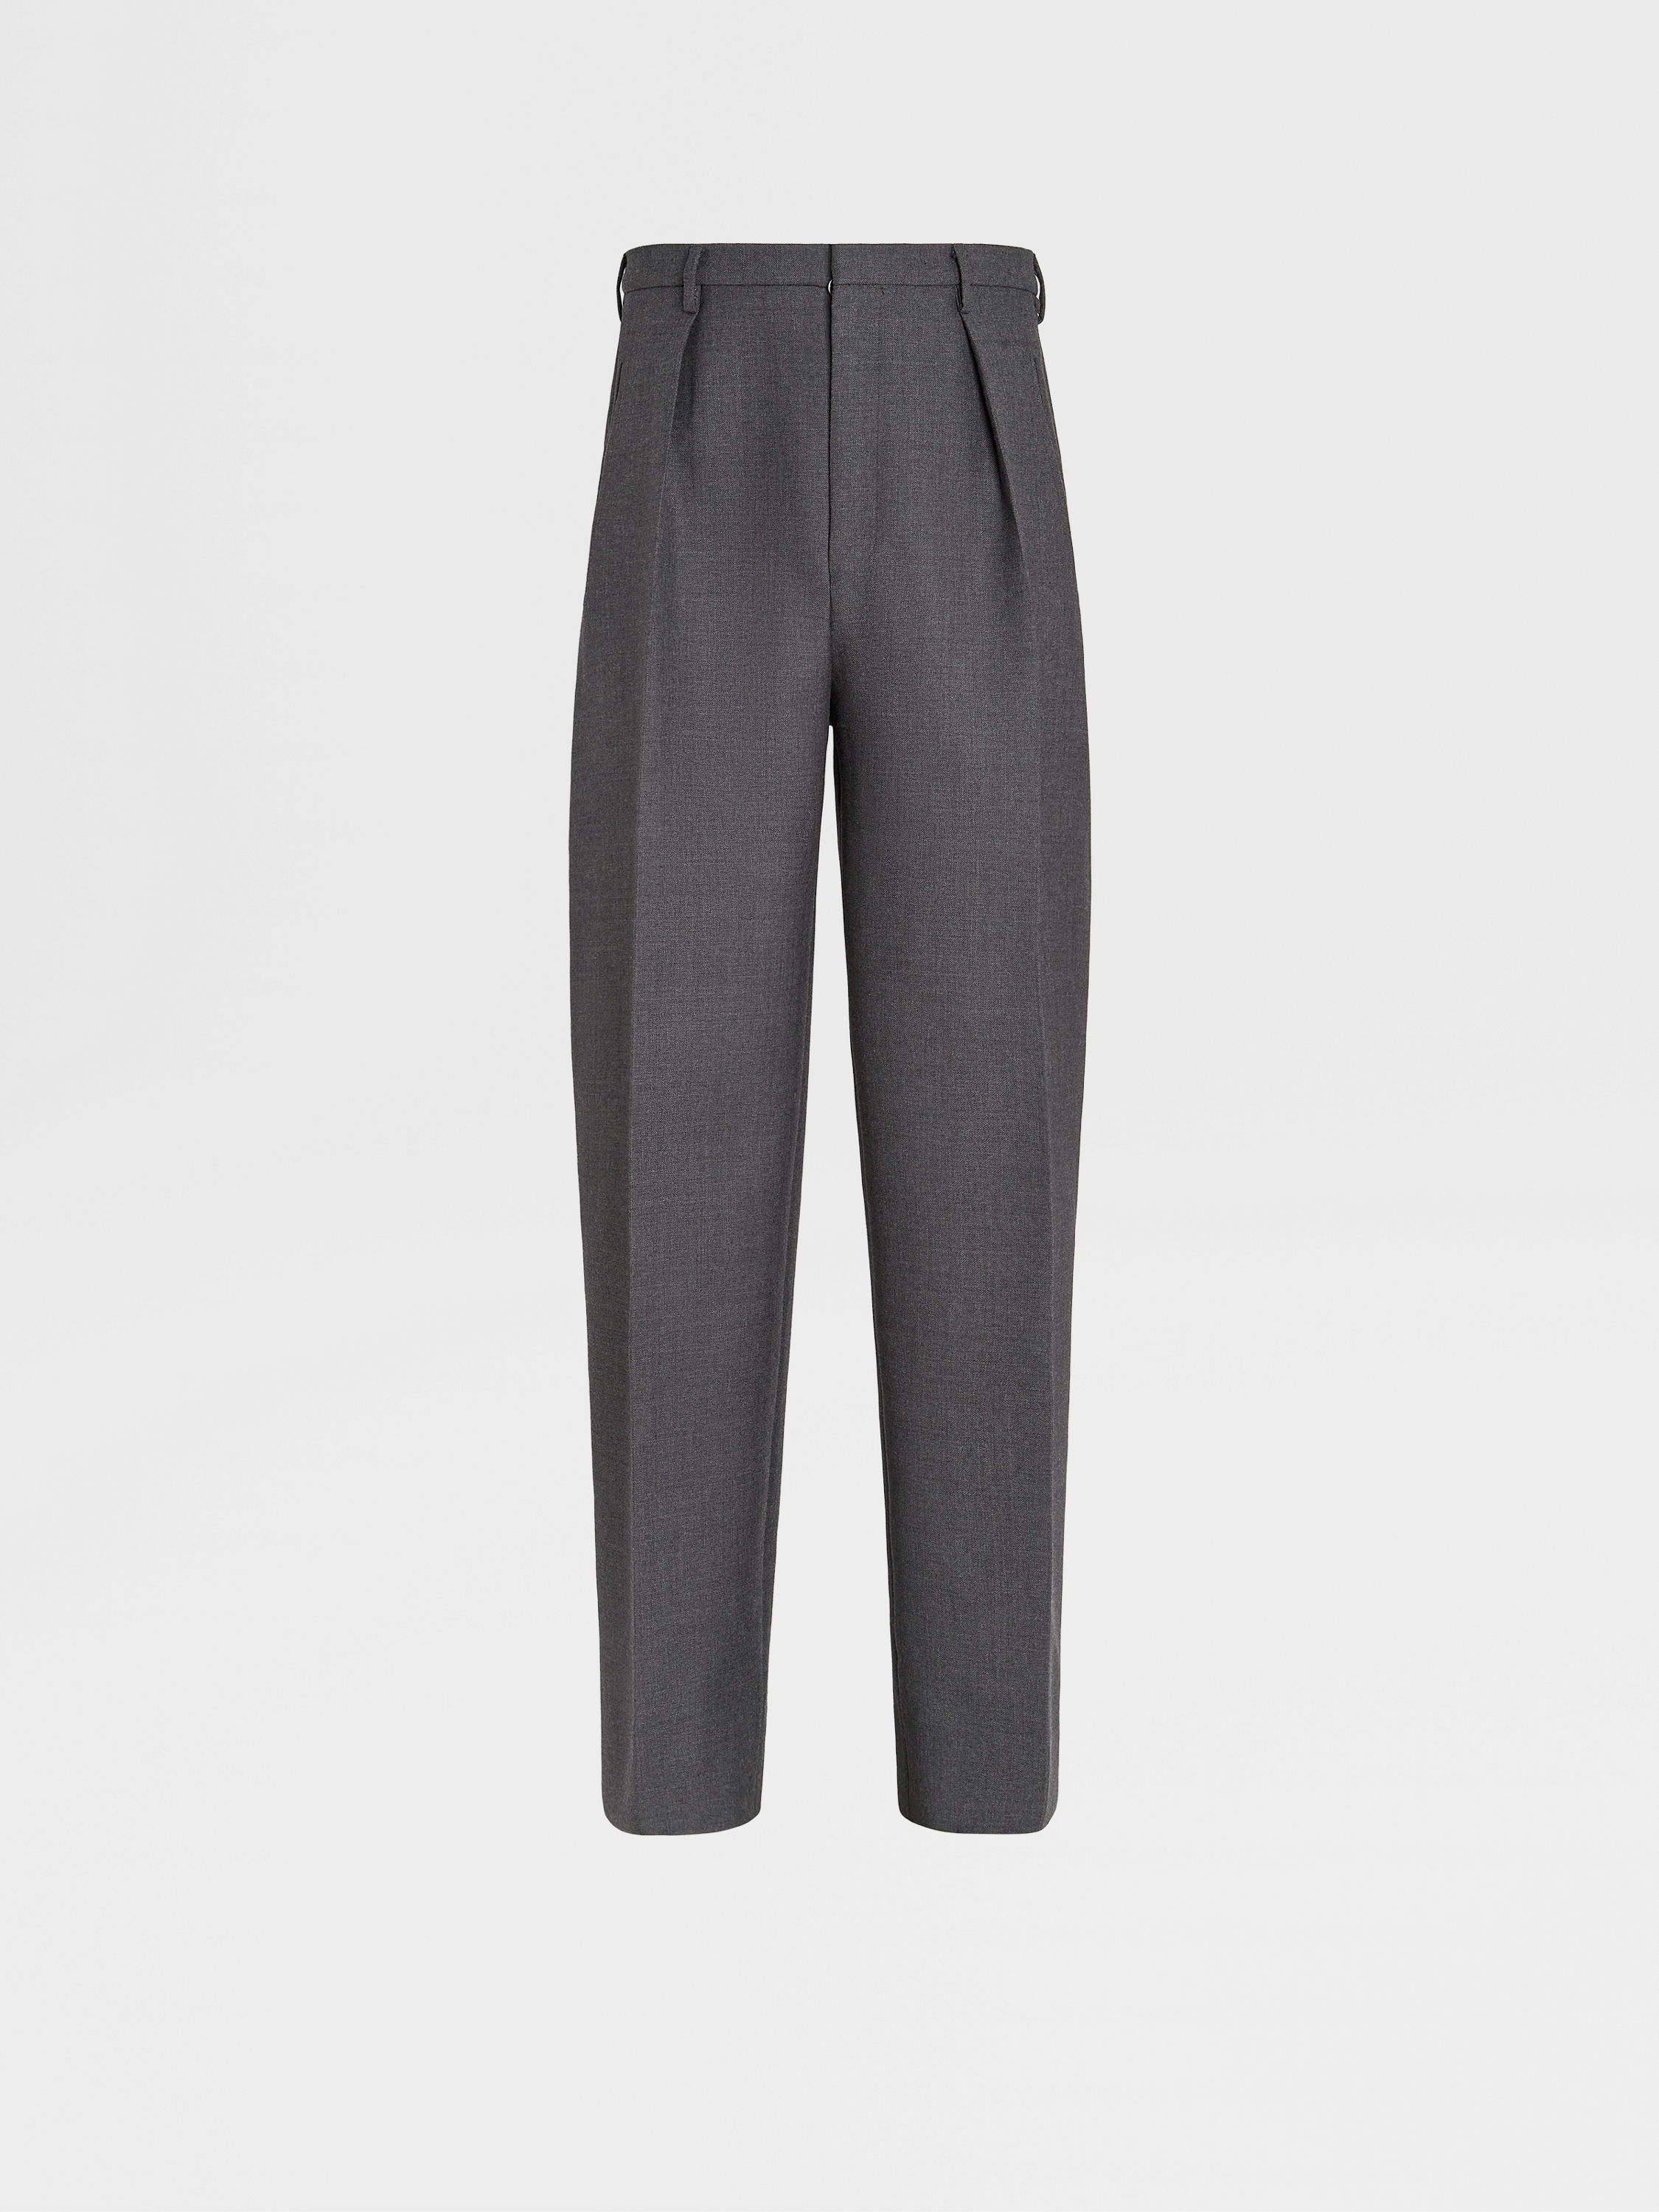 WOOL TROUSERS - LIMITED EDITION - Anthracite Grey